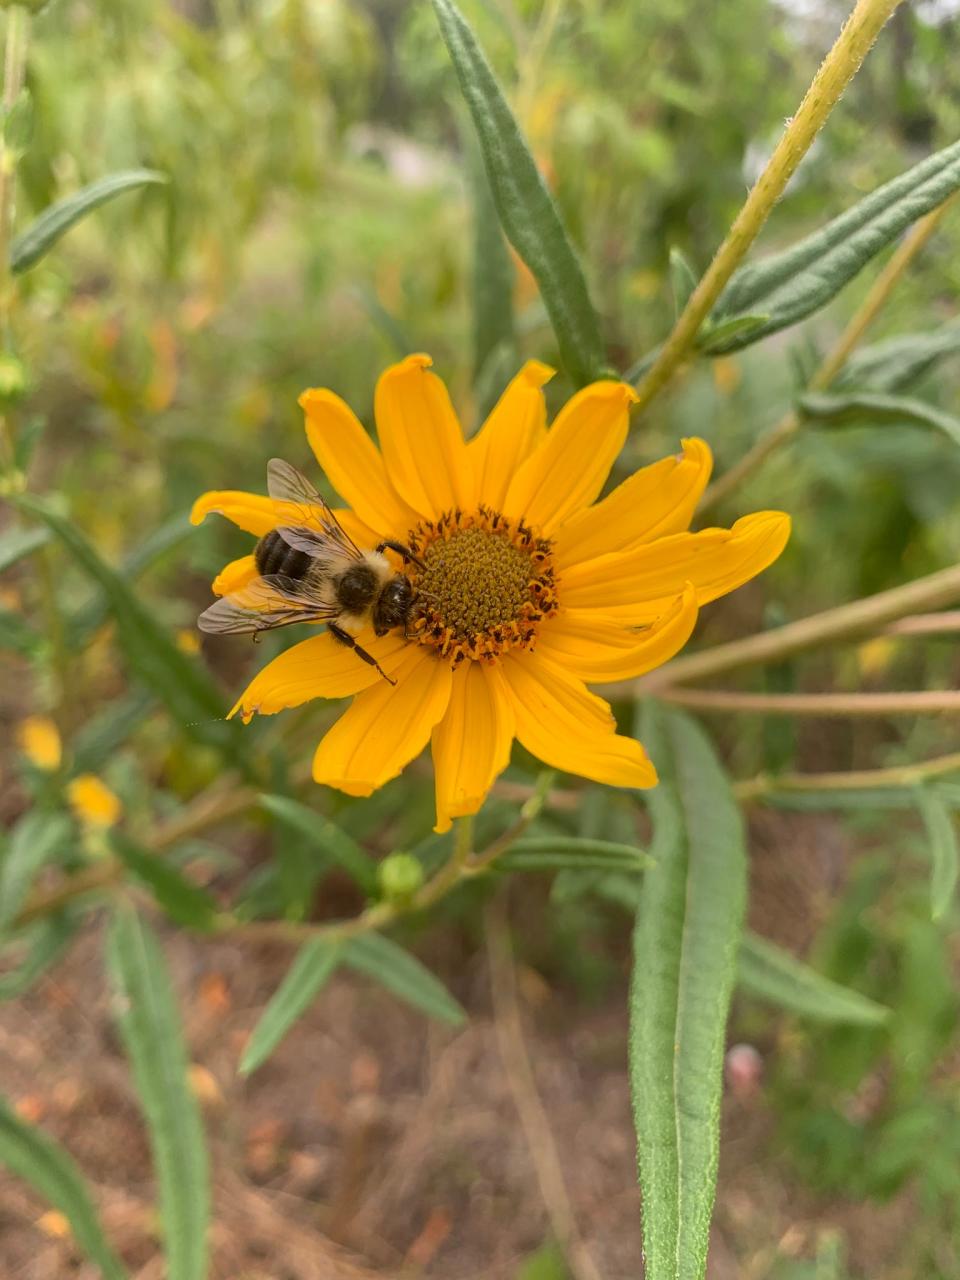 A bumblebee pollinating a dune sunflower at the Leon County Extension Office.